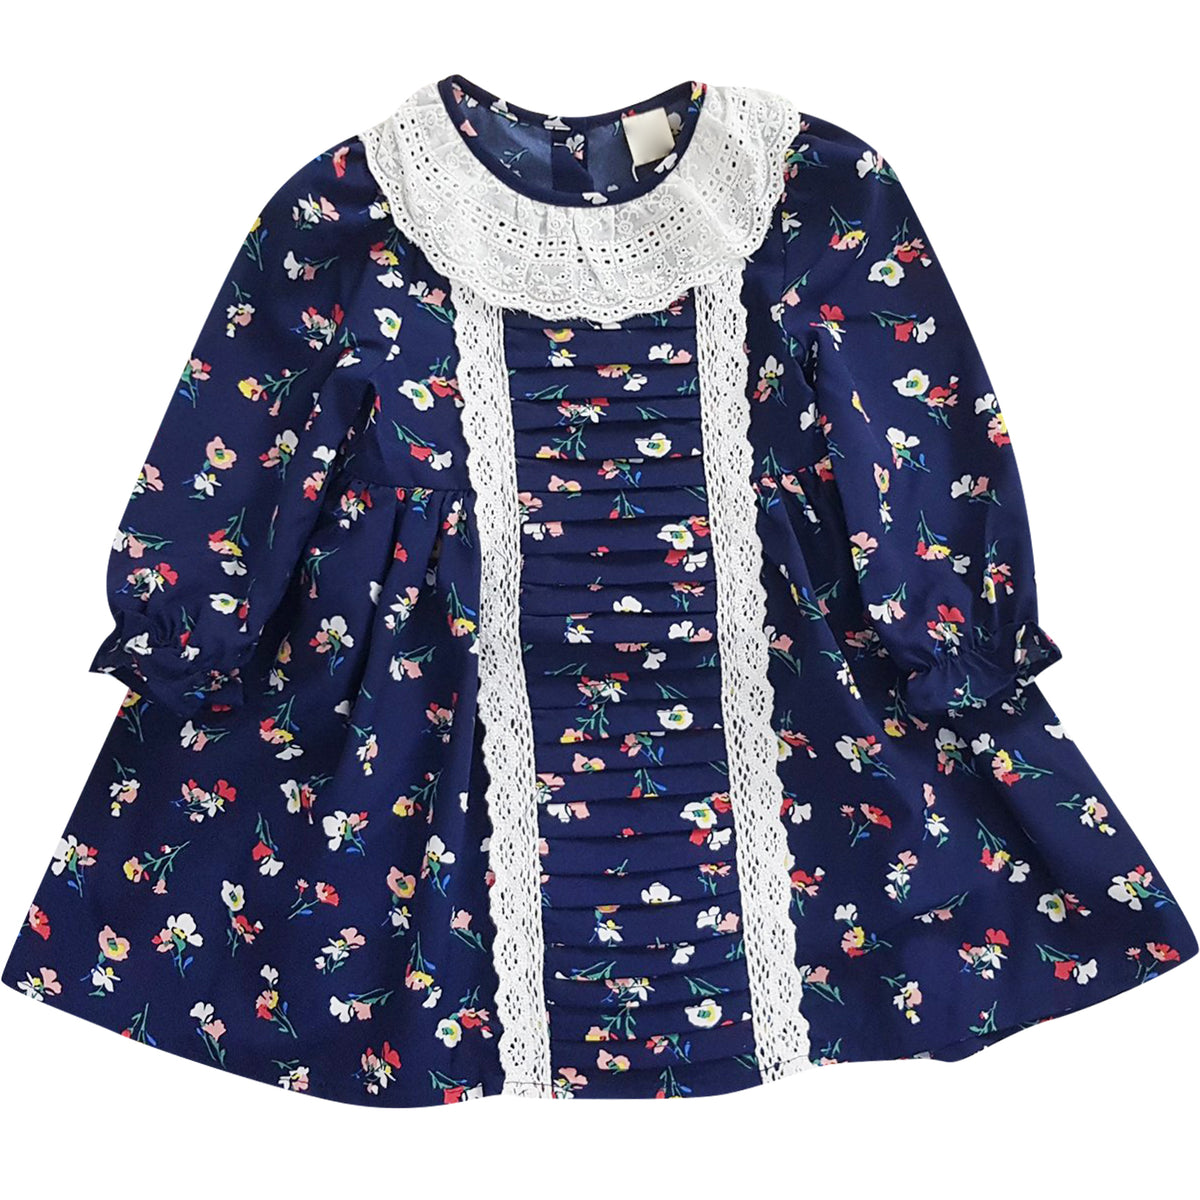 Baby Toddler Little Girls Fall Winter Navy Floral Lace Pleated Dress - Navy - Angeline Kids